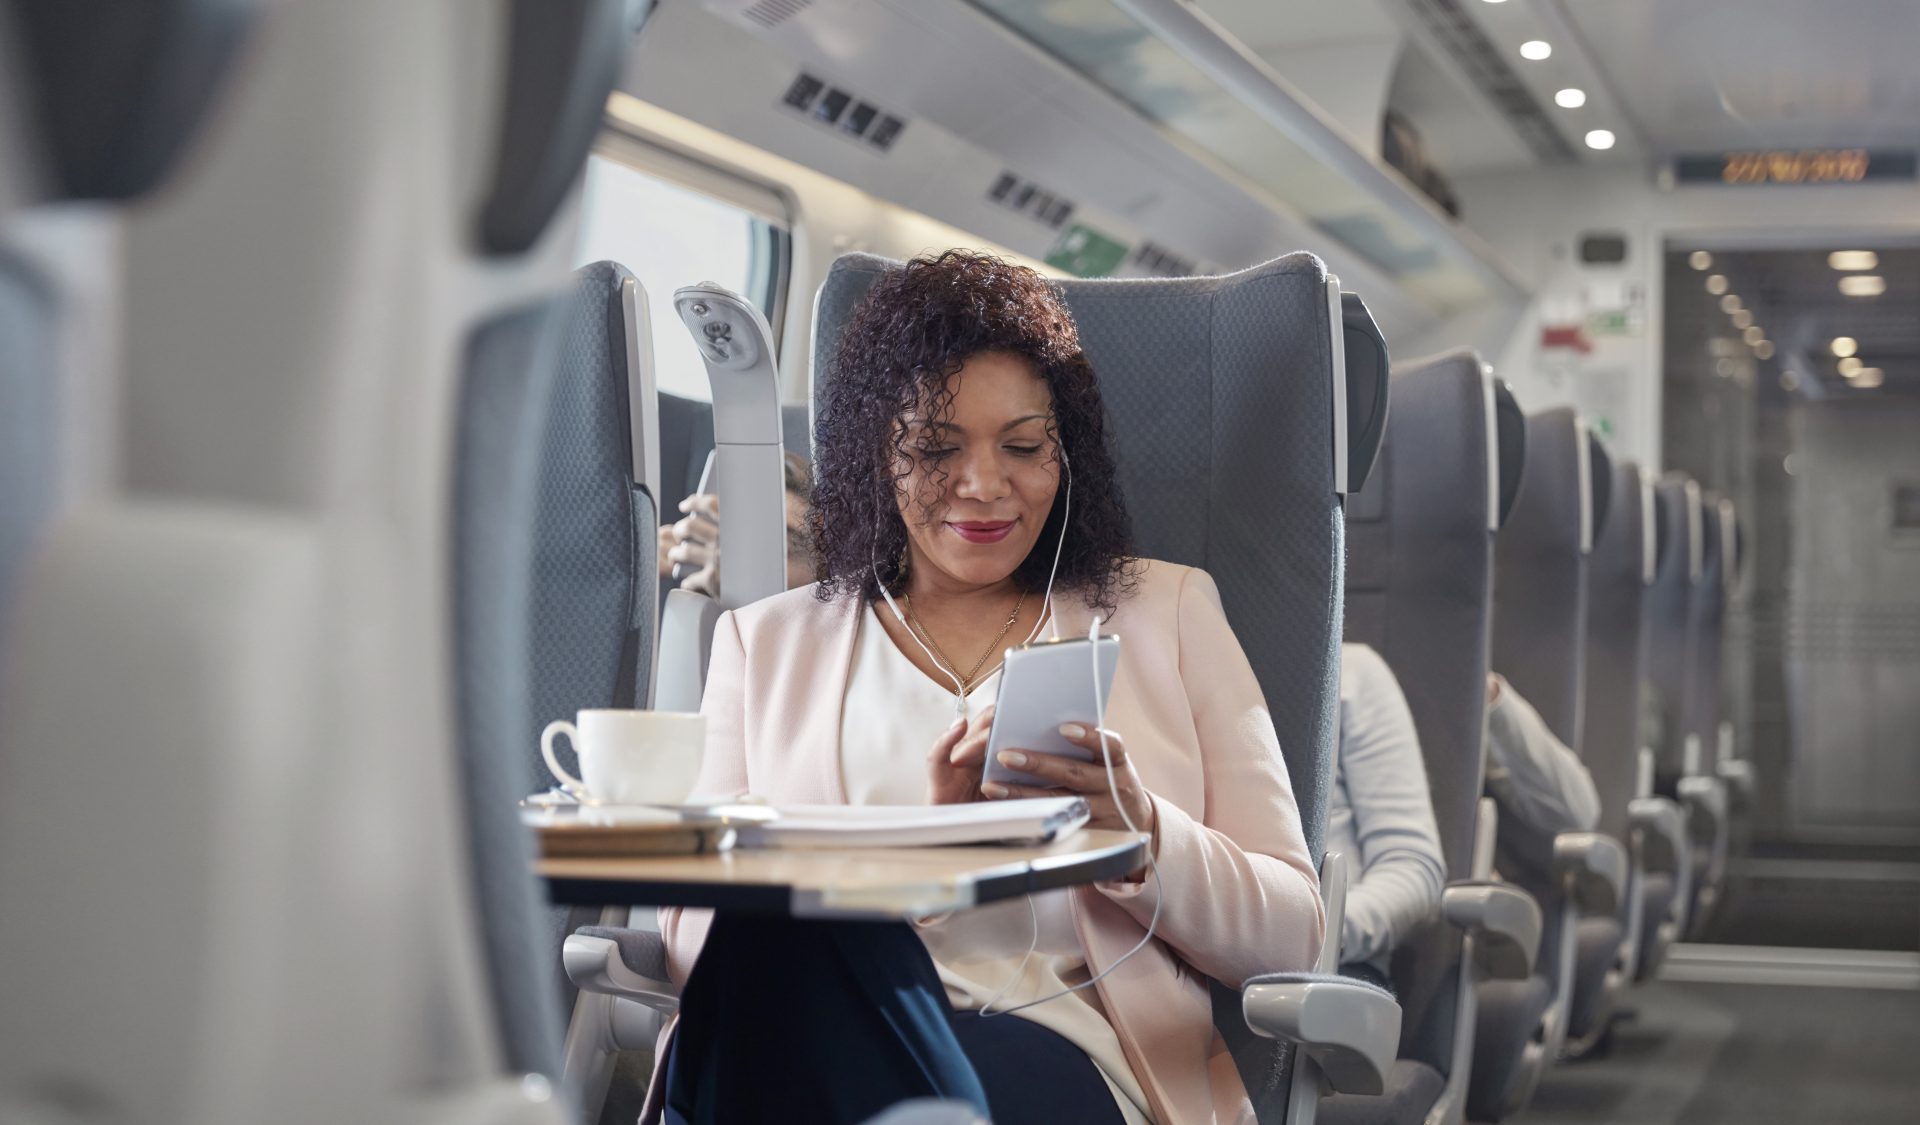 photo of a businesswoman using a smartphone on a passenger train